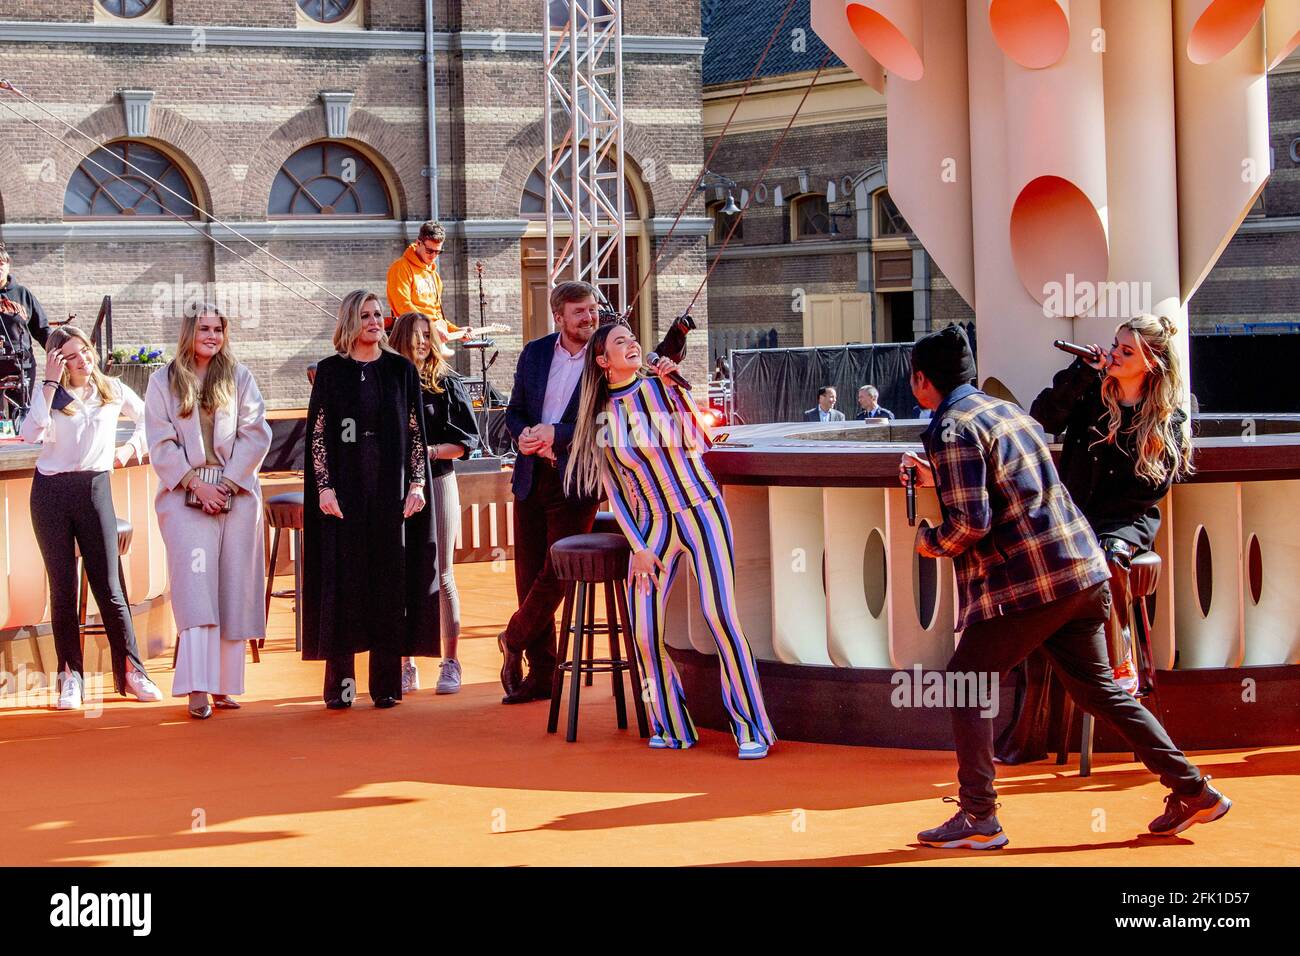 THE HAGUE - Royal Couple King Willem-Alexander and Queen Maxima and Princess Ariane Alexia and Amalia provide a stage for The Streamers' online concert on King's Day The Streamers consist of Guus Meeuwis, Rolf Sanchez, Kraantje Pappie, Suzan & Freek, VanVelzen, Davina Michelle, Paul de Munnik, Typhoon, Thomas Acda, Diggy Dex, Nick & Simon, Maan, Danny Vera, Miss Montreal and Paul de Leeuw. Band manager Frank Lammers is also present. netherlands Photo by Robin Utrecht/ABACAPRESS.COM Stock Photo